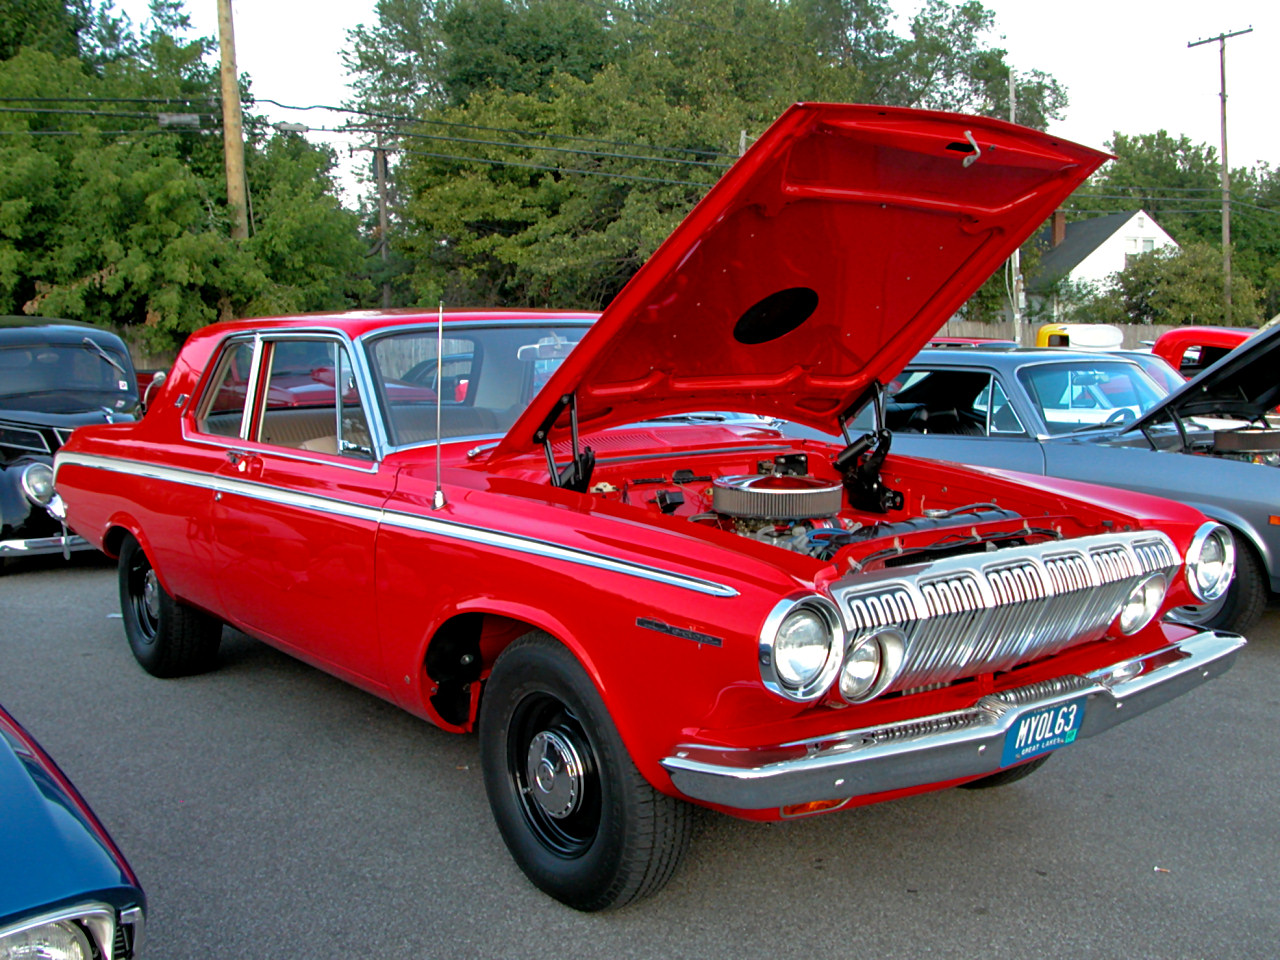 Attached picture 8317641-1963-Dodge-440-2-Door-Sedan-with-Modified-426-Wedge-Vermillion-fvr-2005-Dream-Cruise-N.jpg